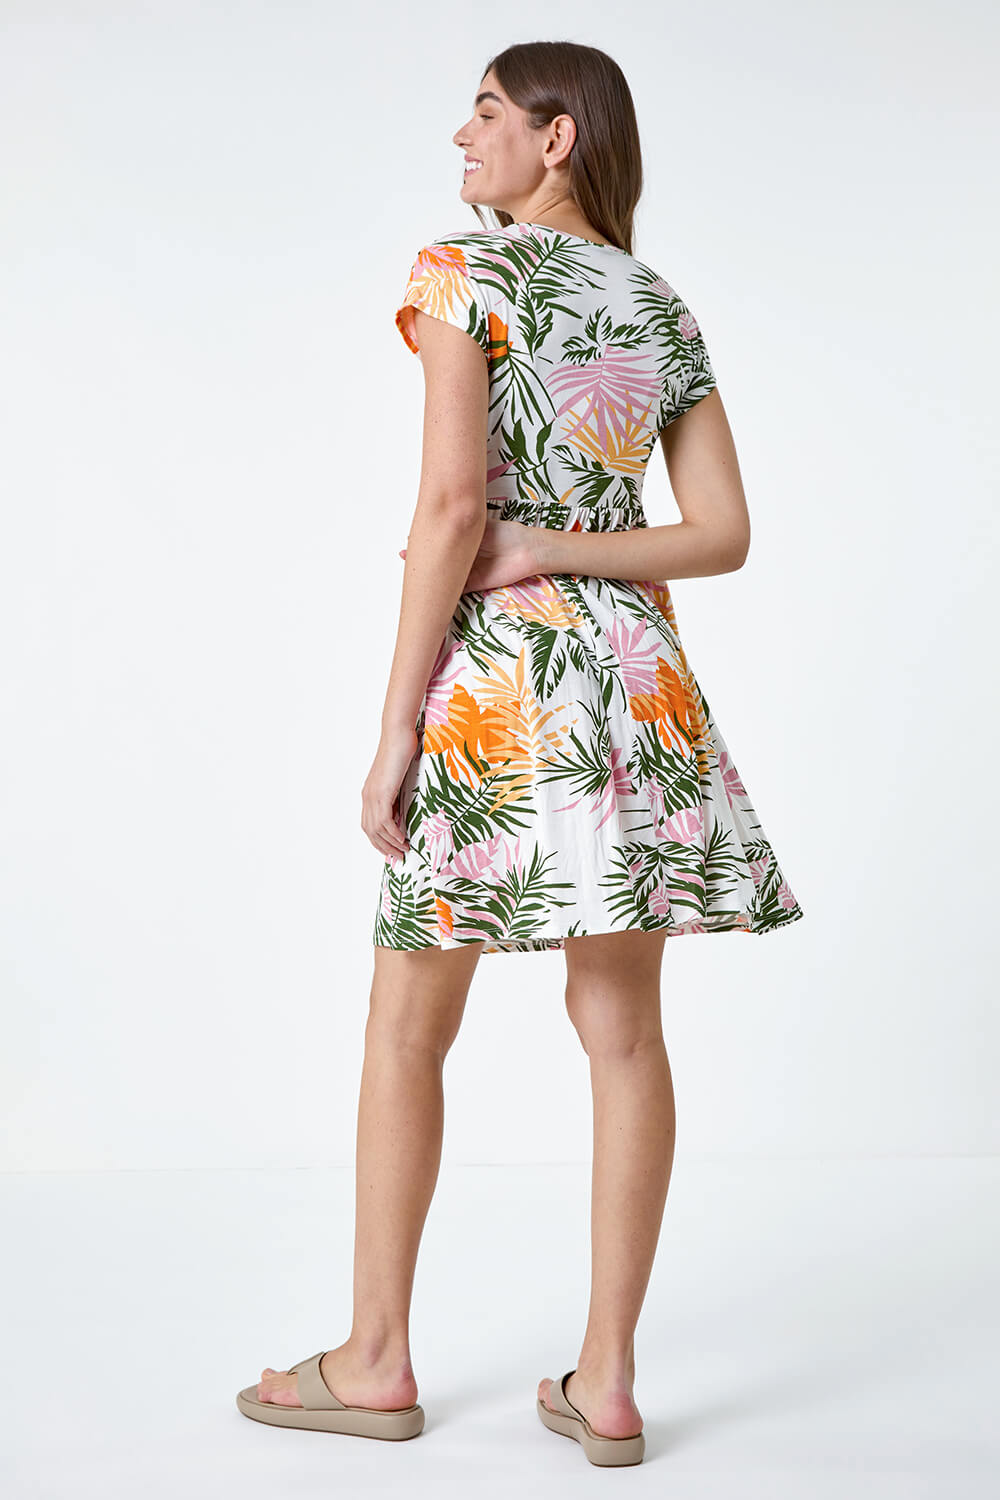 Green Tropical Floral Gathered Stretch Dress, Image 3 of 5